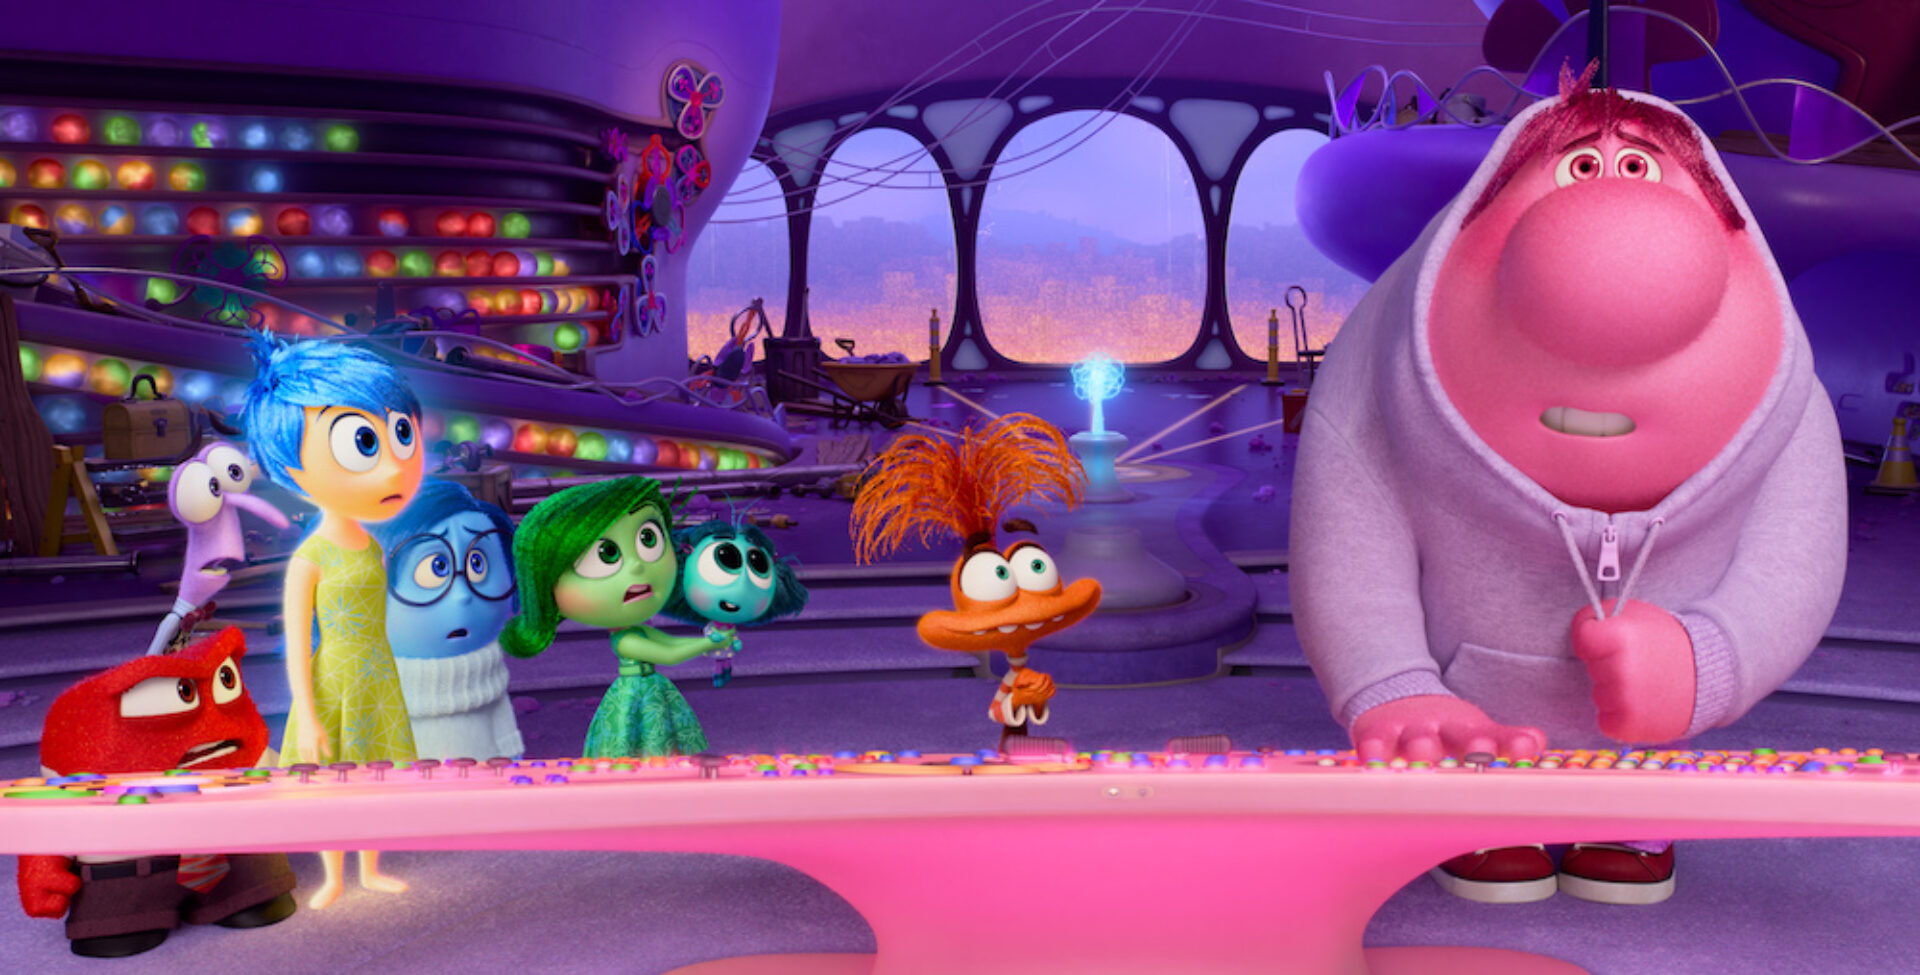 Of all the Pixar films, Inside Out seems most suited for a sequel. The first film's conclusion sets the stage perfectly, leaving us wanting more.